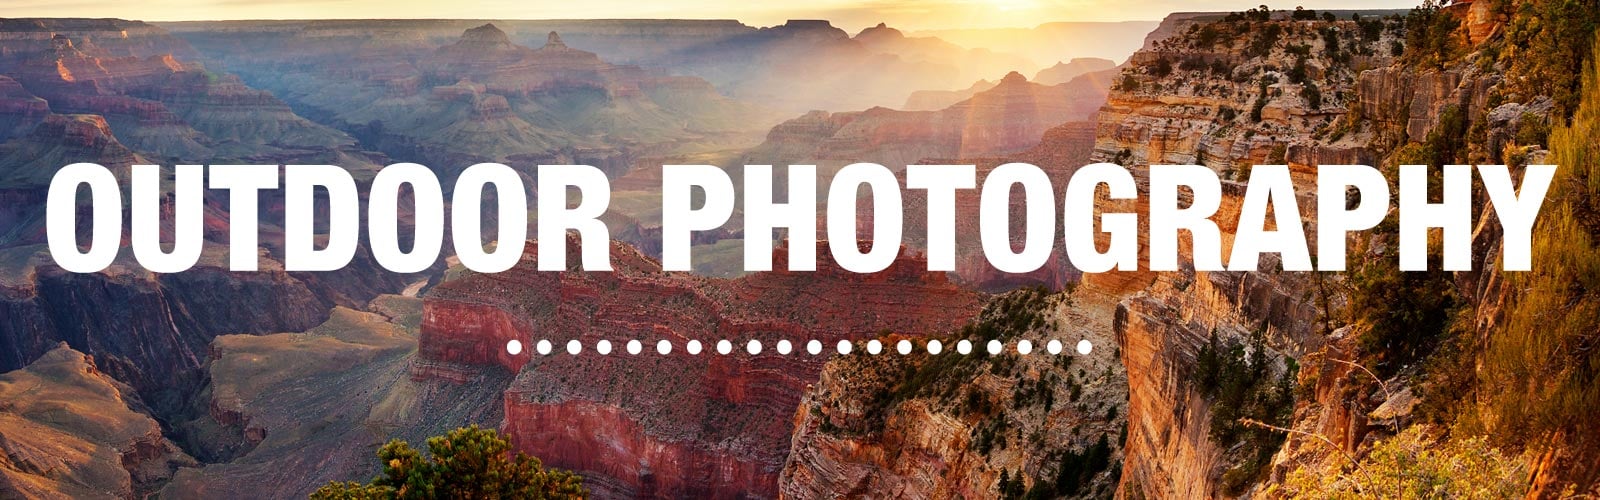 Outdoor Photography Guide